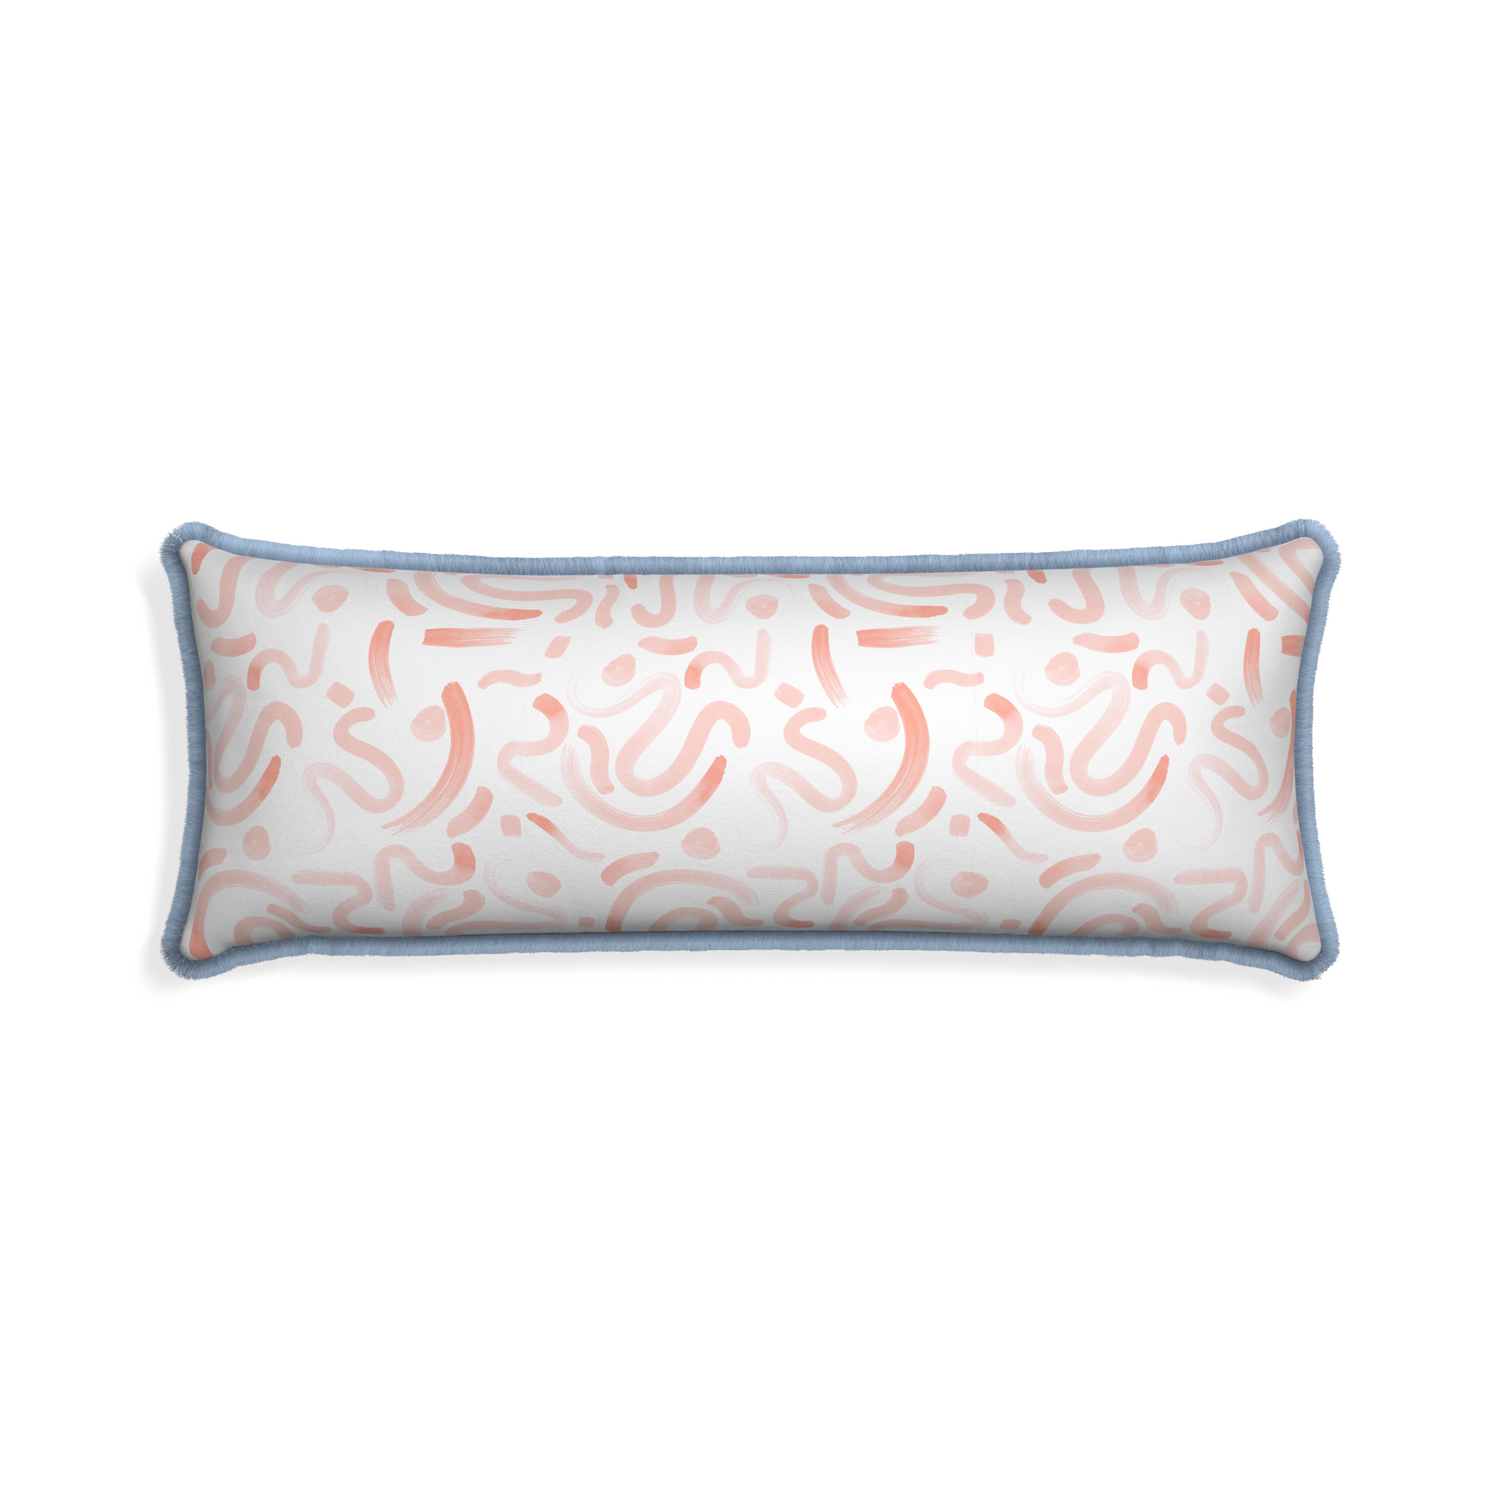 Xl-lumbar hockney pink custom pink graphicpillow with sky fringe on white background